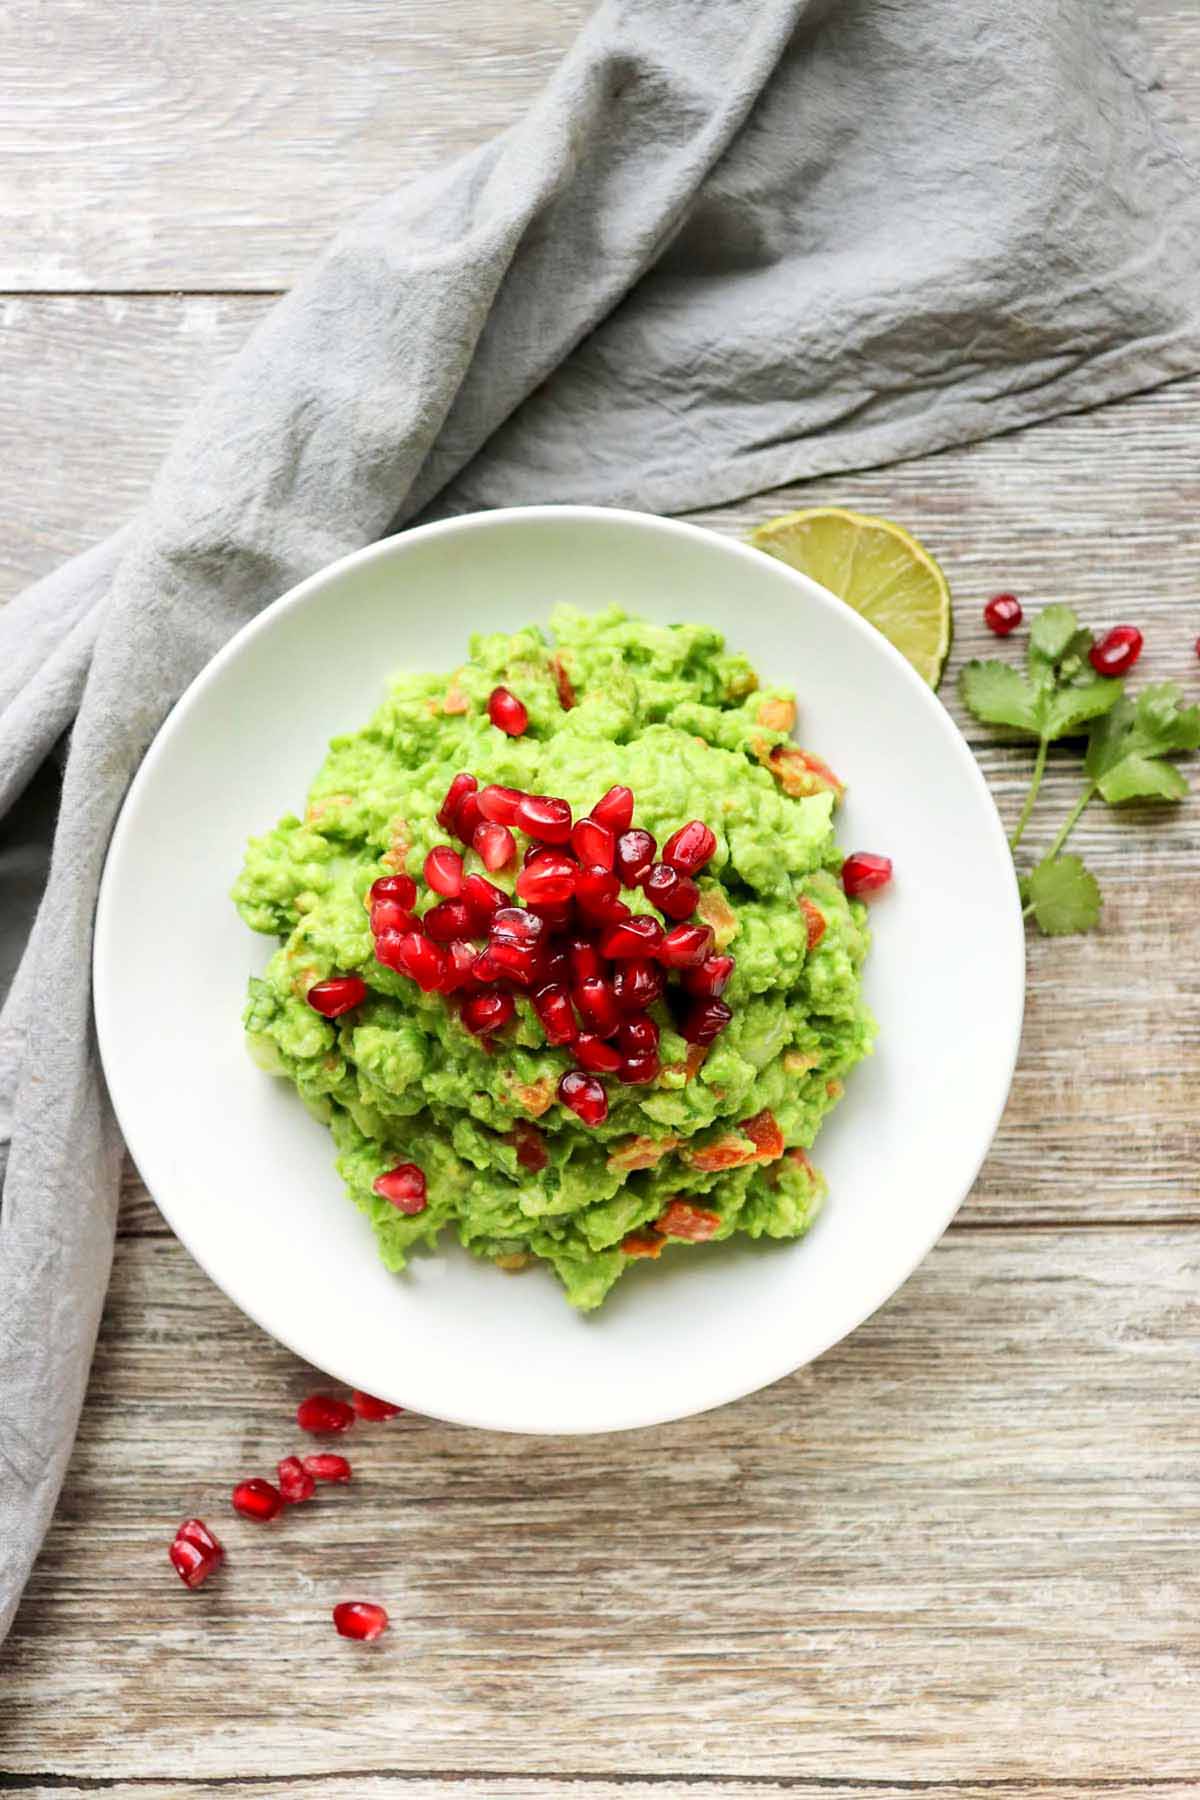 Guacamole in a bowl next to a kitchen towel.